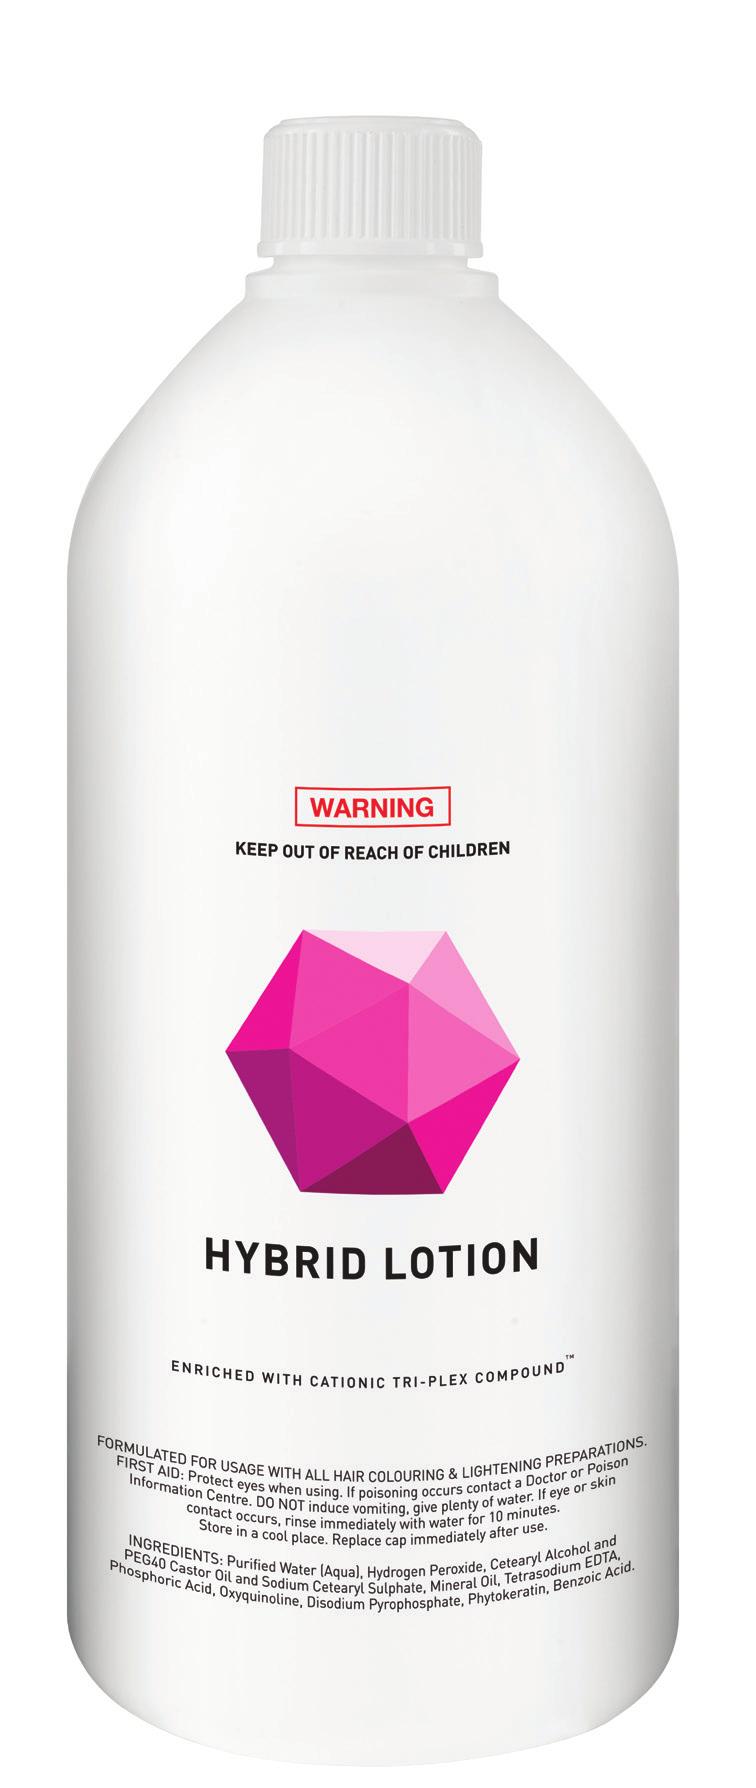 MUK HYBRID ULTRA LIFT BLEACH muk Hybrid Ultra Lift Bleach is designed to produce clean and clear